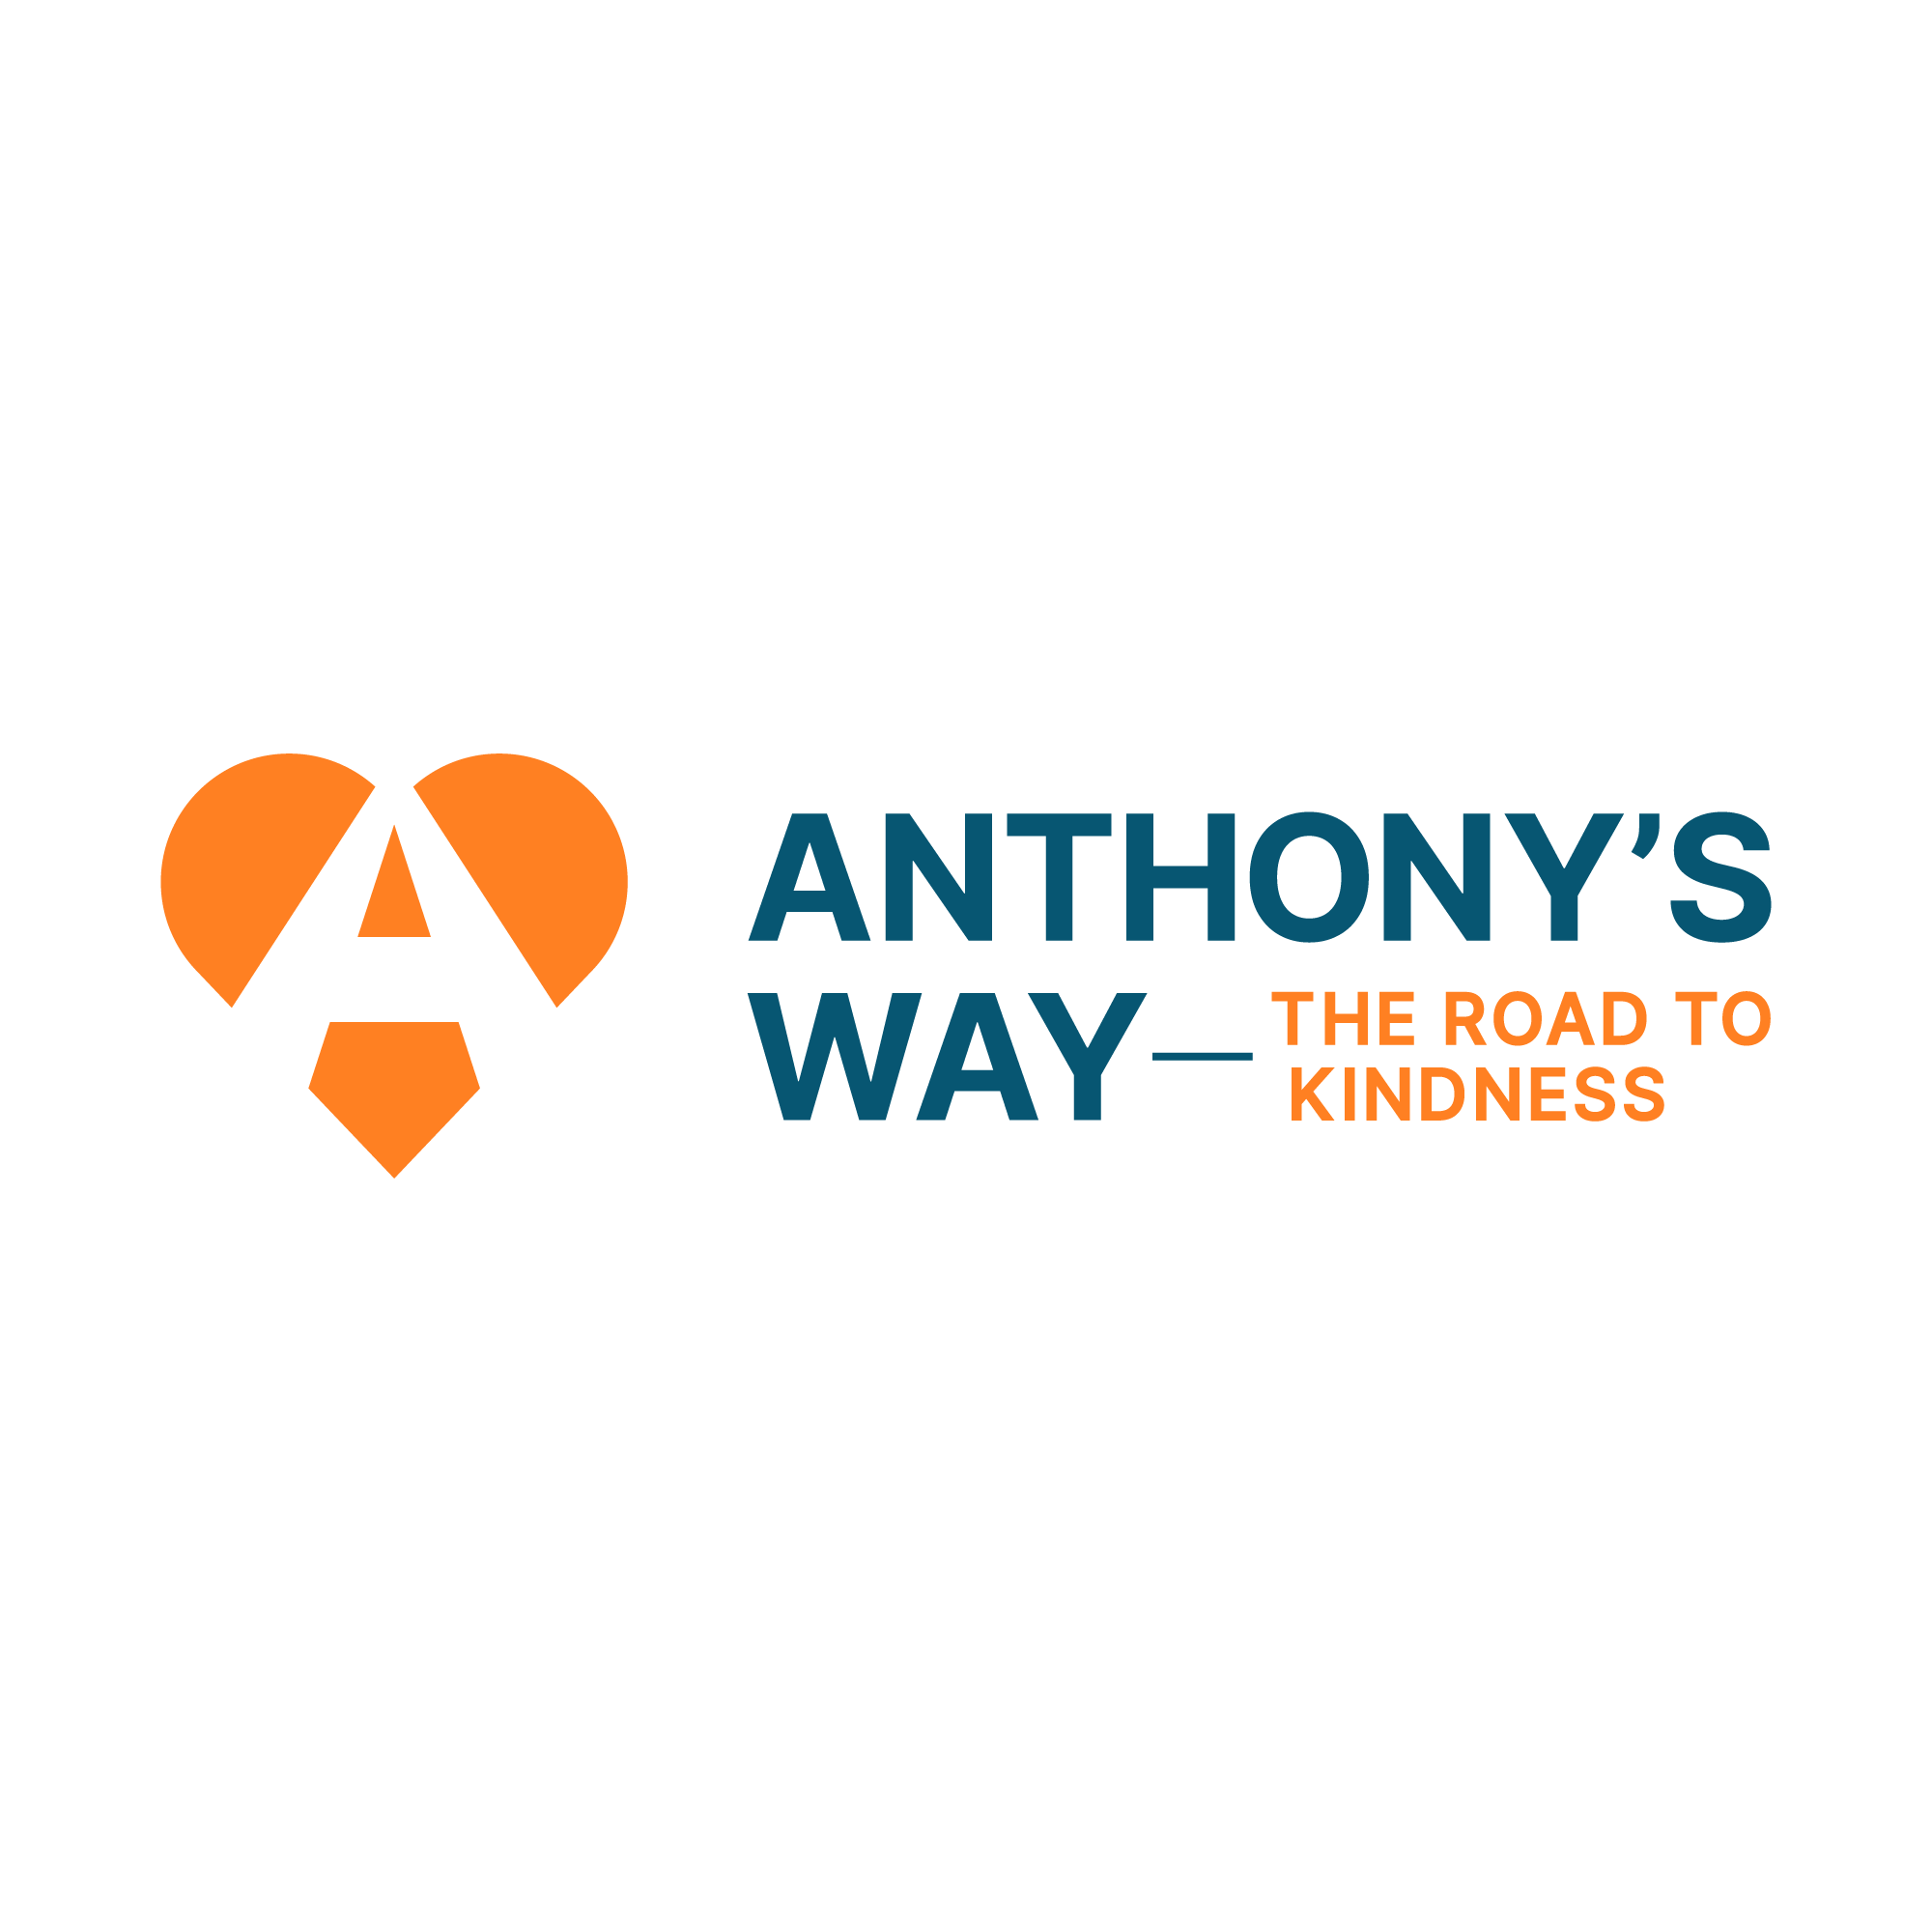 Anthony's Way - The Road to Kindness